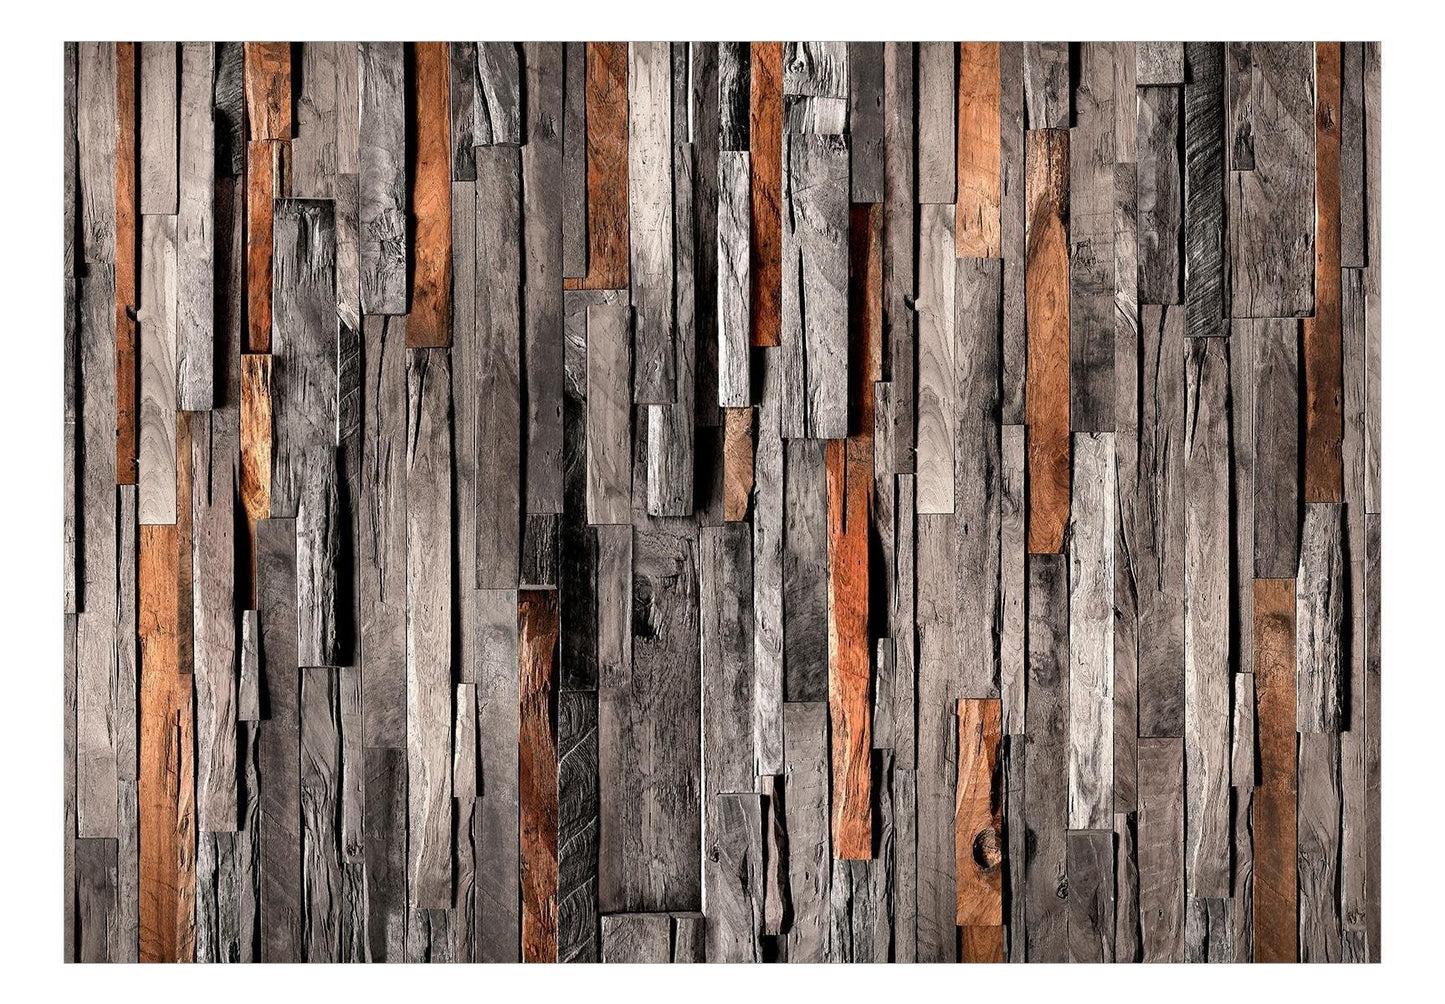 Peel and stick wall mural - Wooden Curtain (Grey and Brown) - www.trendingbestsellers.com